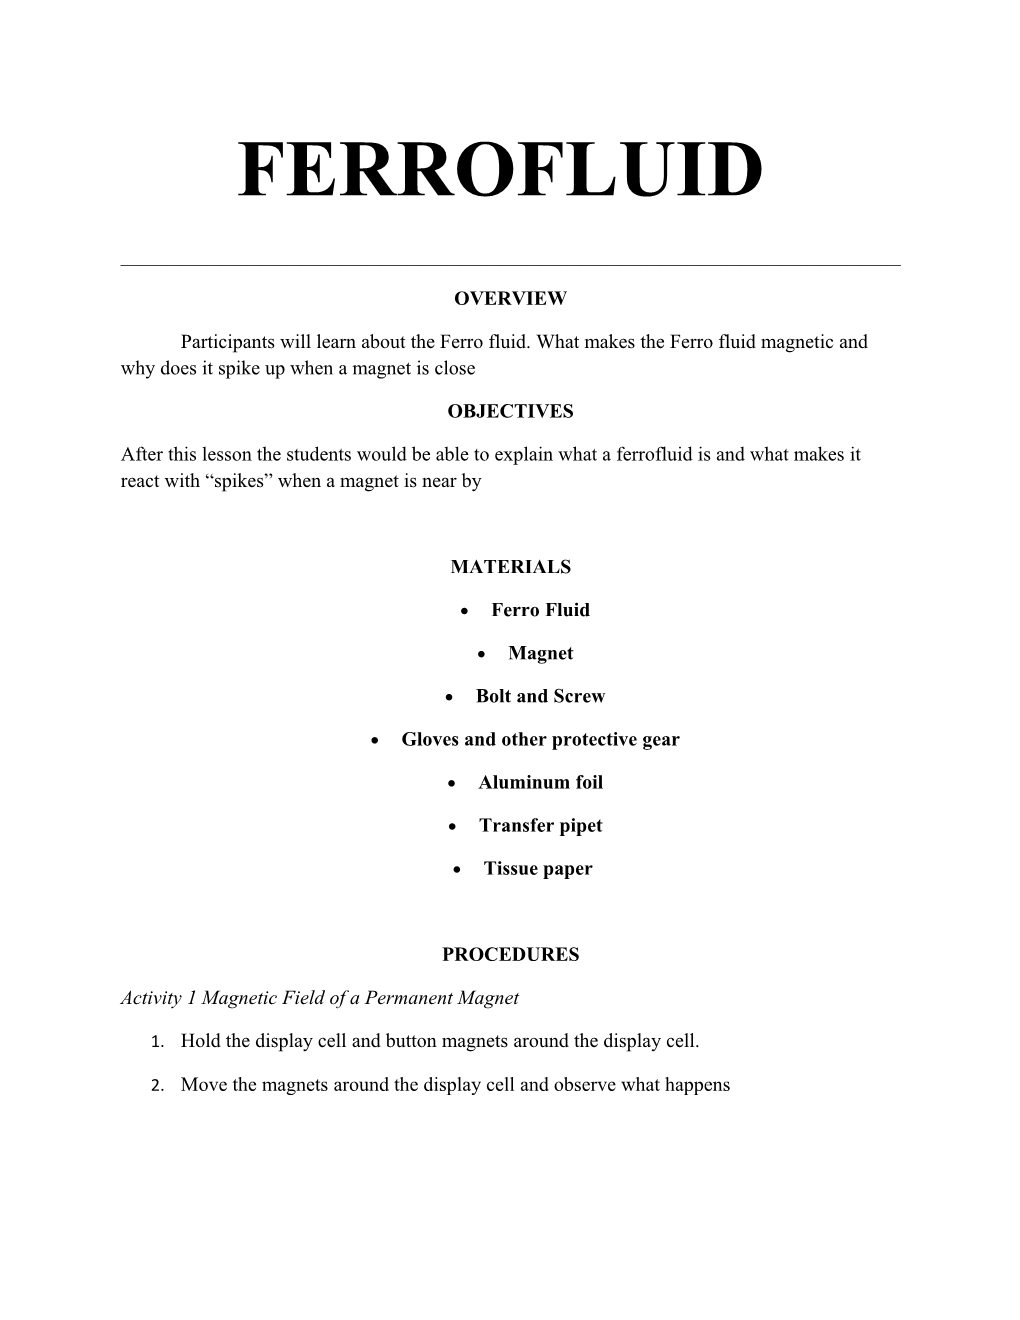 Participants Will Learn About the Ferro Fluid. What Makes the Ferro Fluid Magnetic And